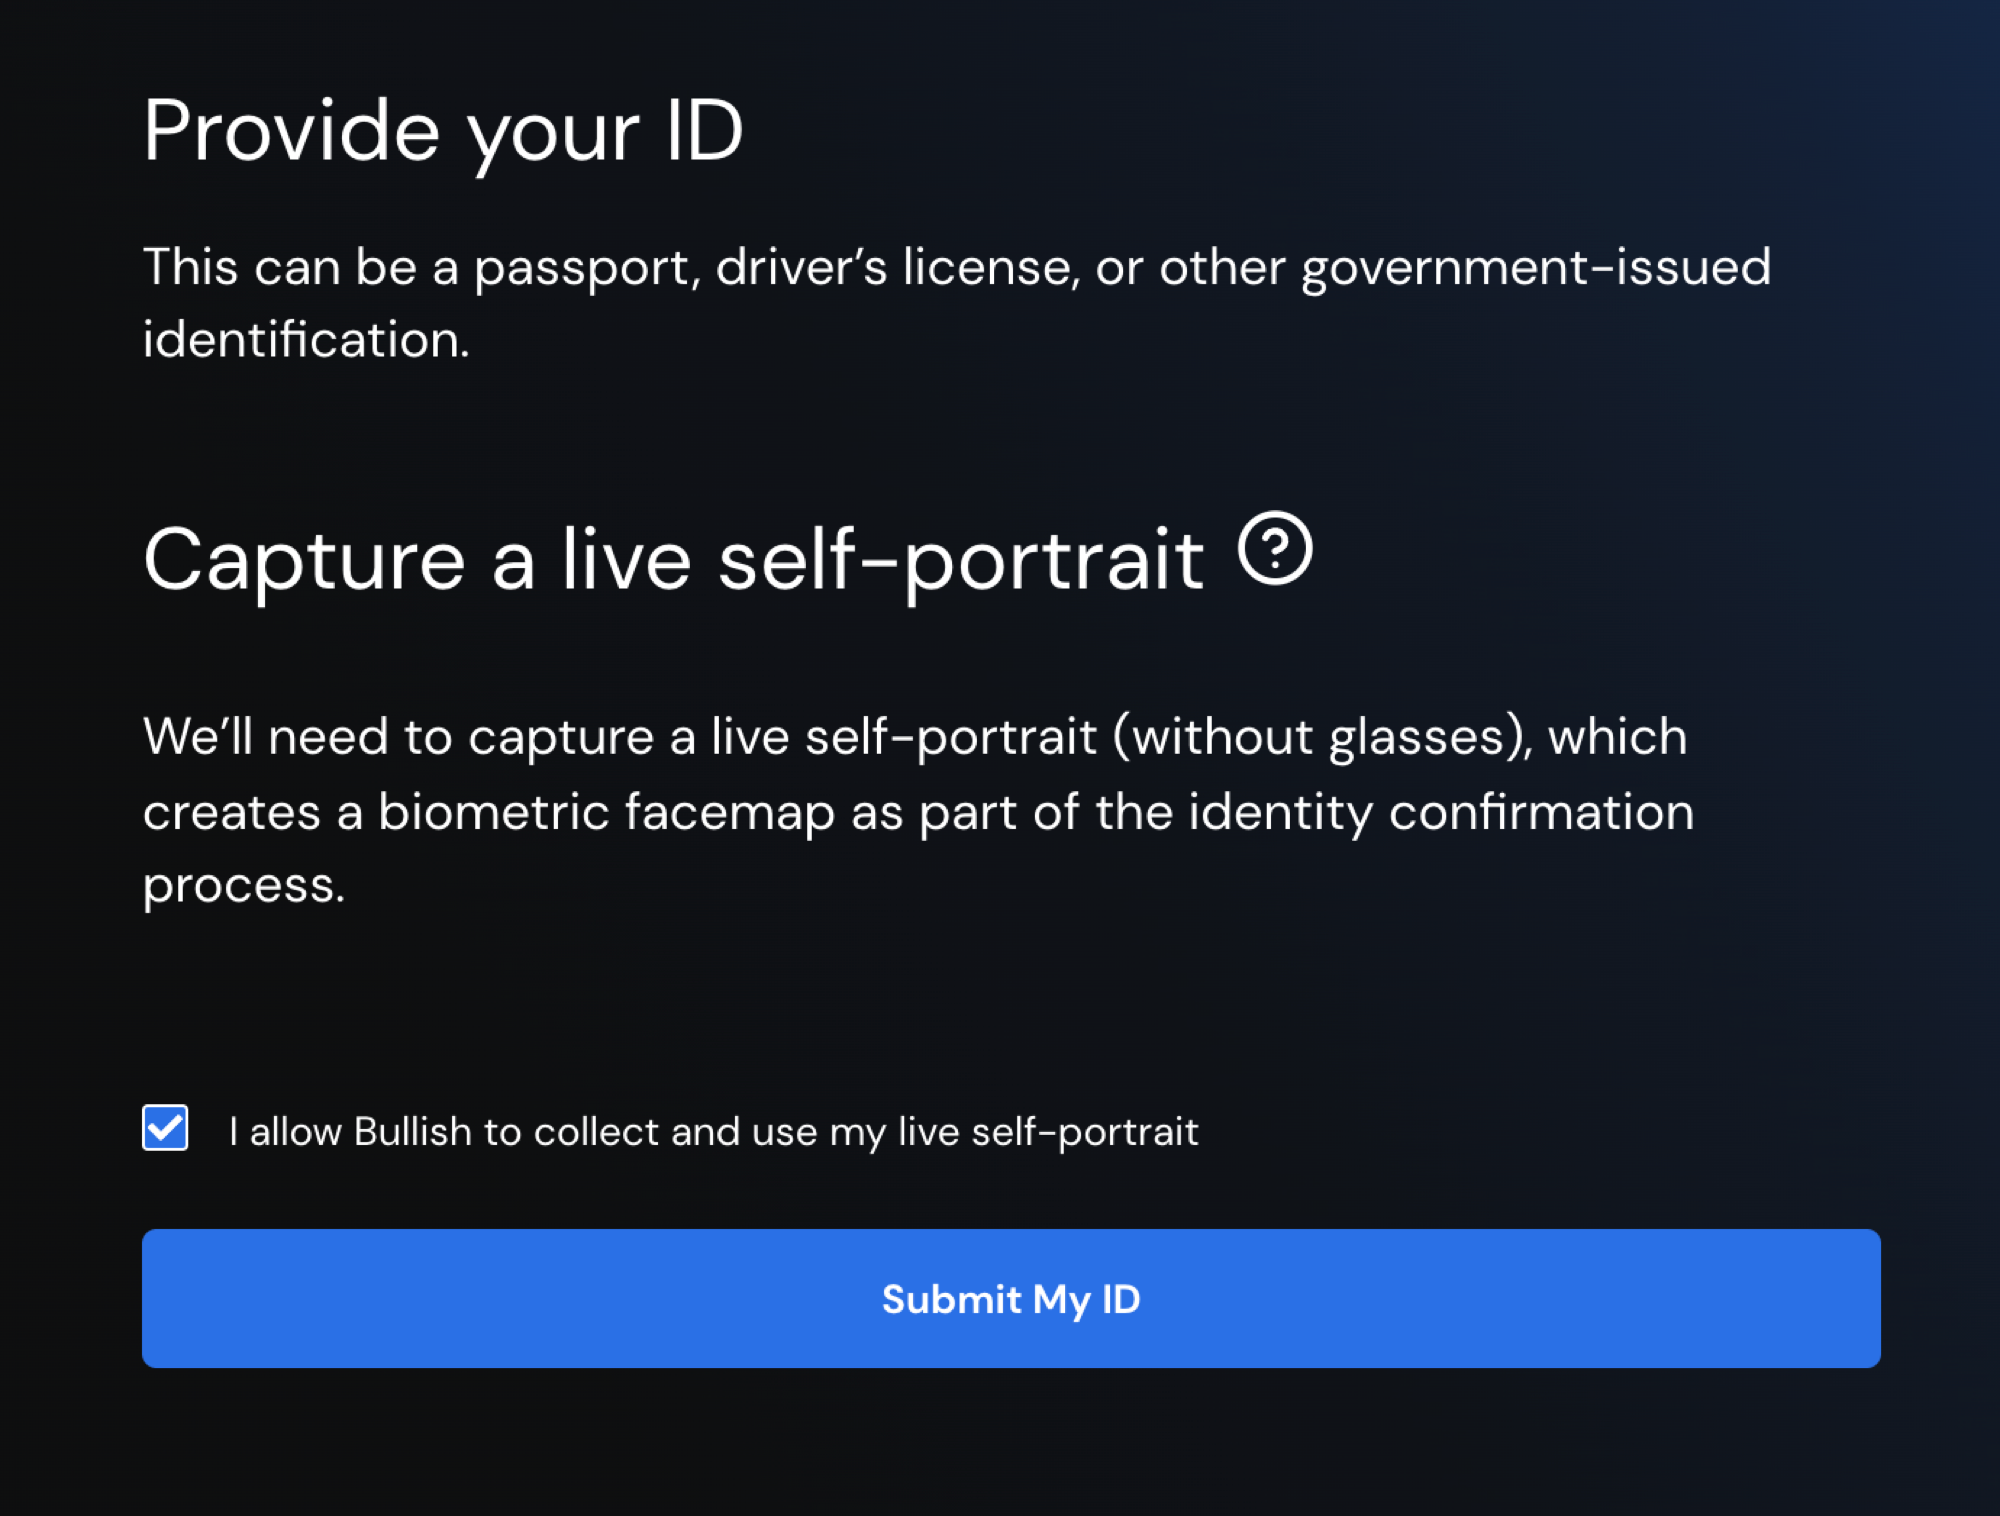 Provide your ID popup window with Submit My ID button